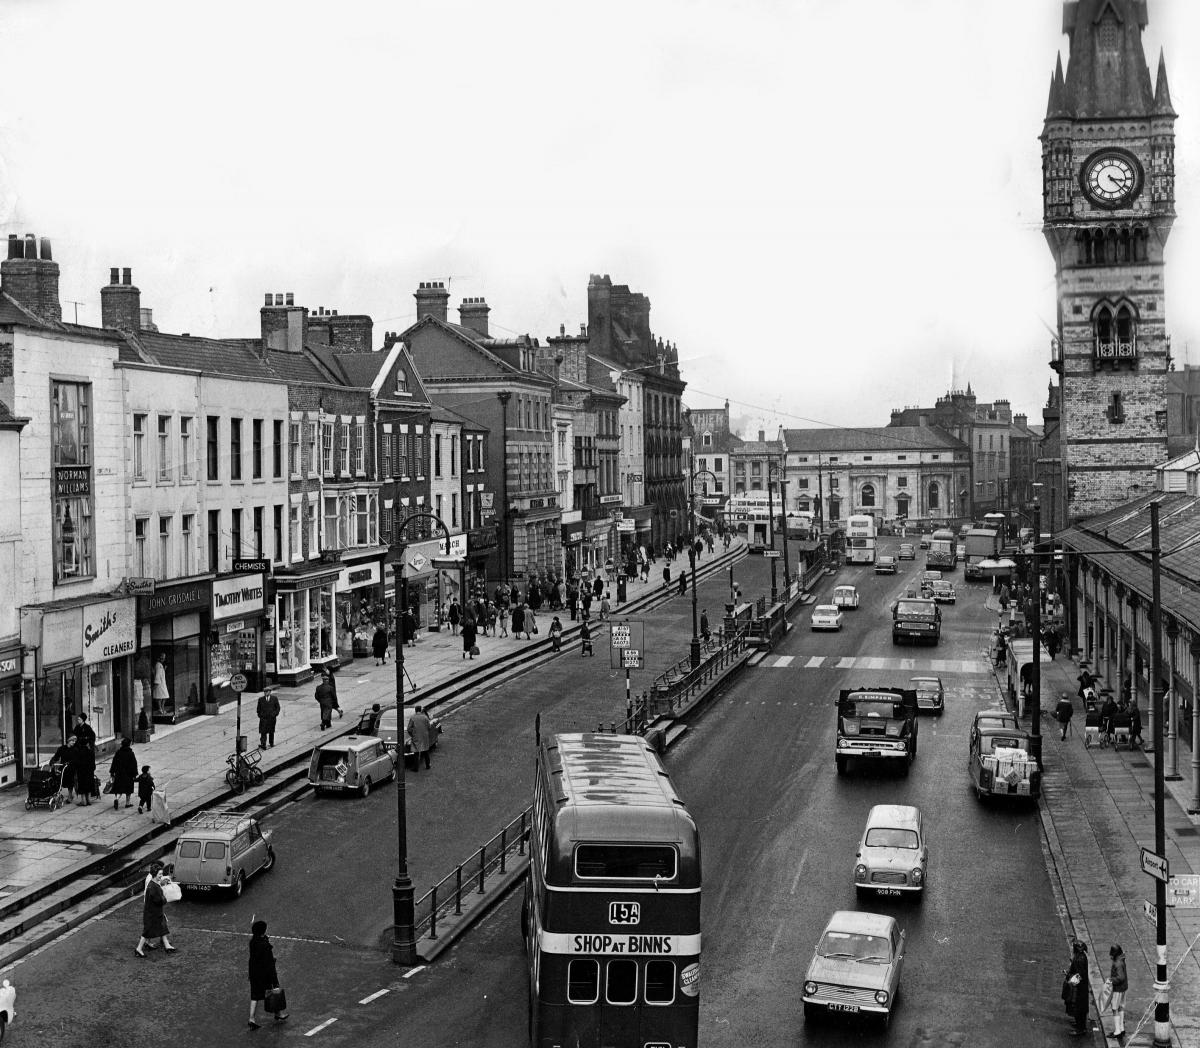 SHOP AT BINNS: So says the double decker turning on to High Row on April 7, 1966. Just above its roof, by the palisade is a line of deck chairs looking down onto the Great North Road